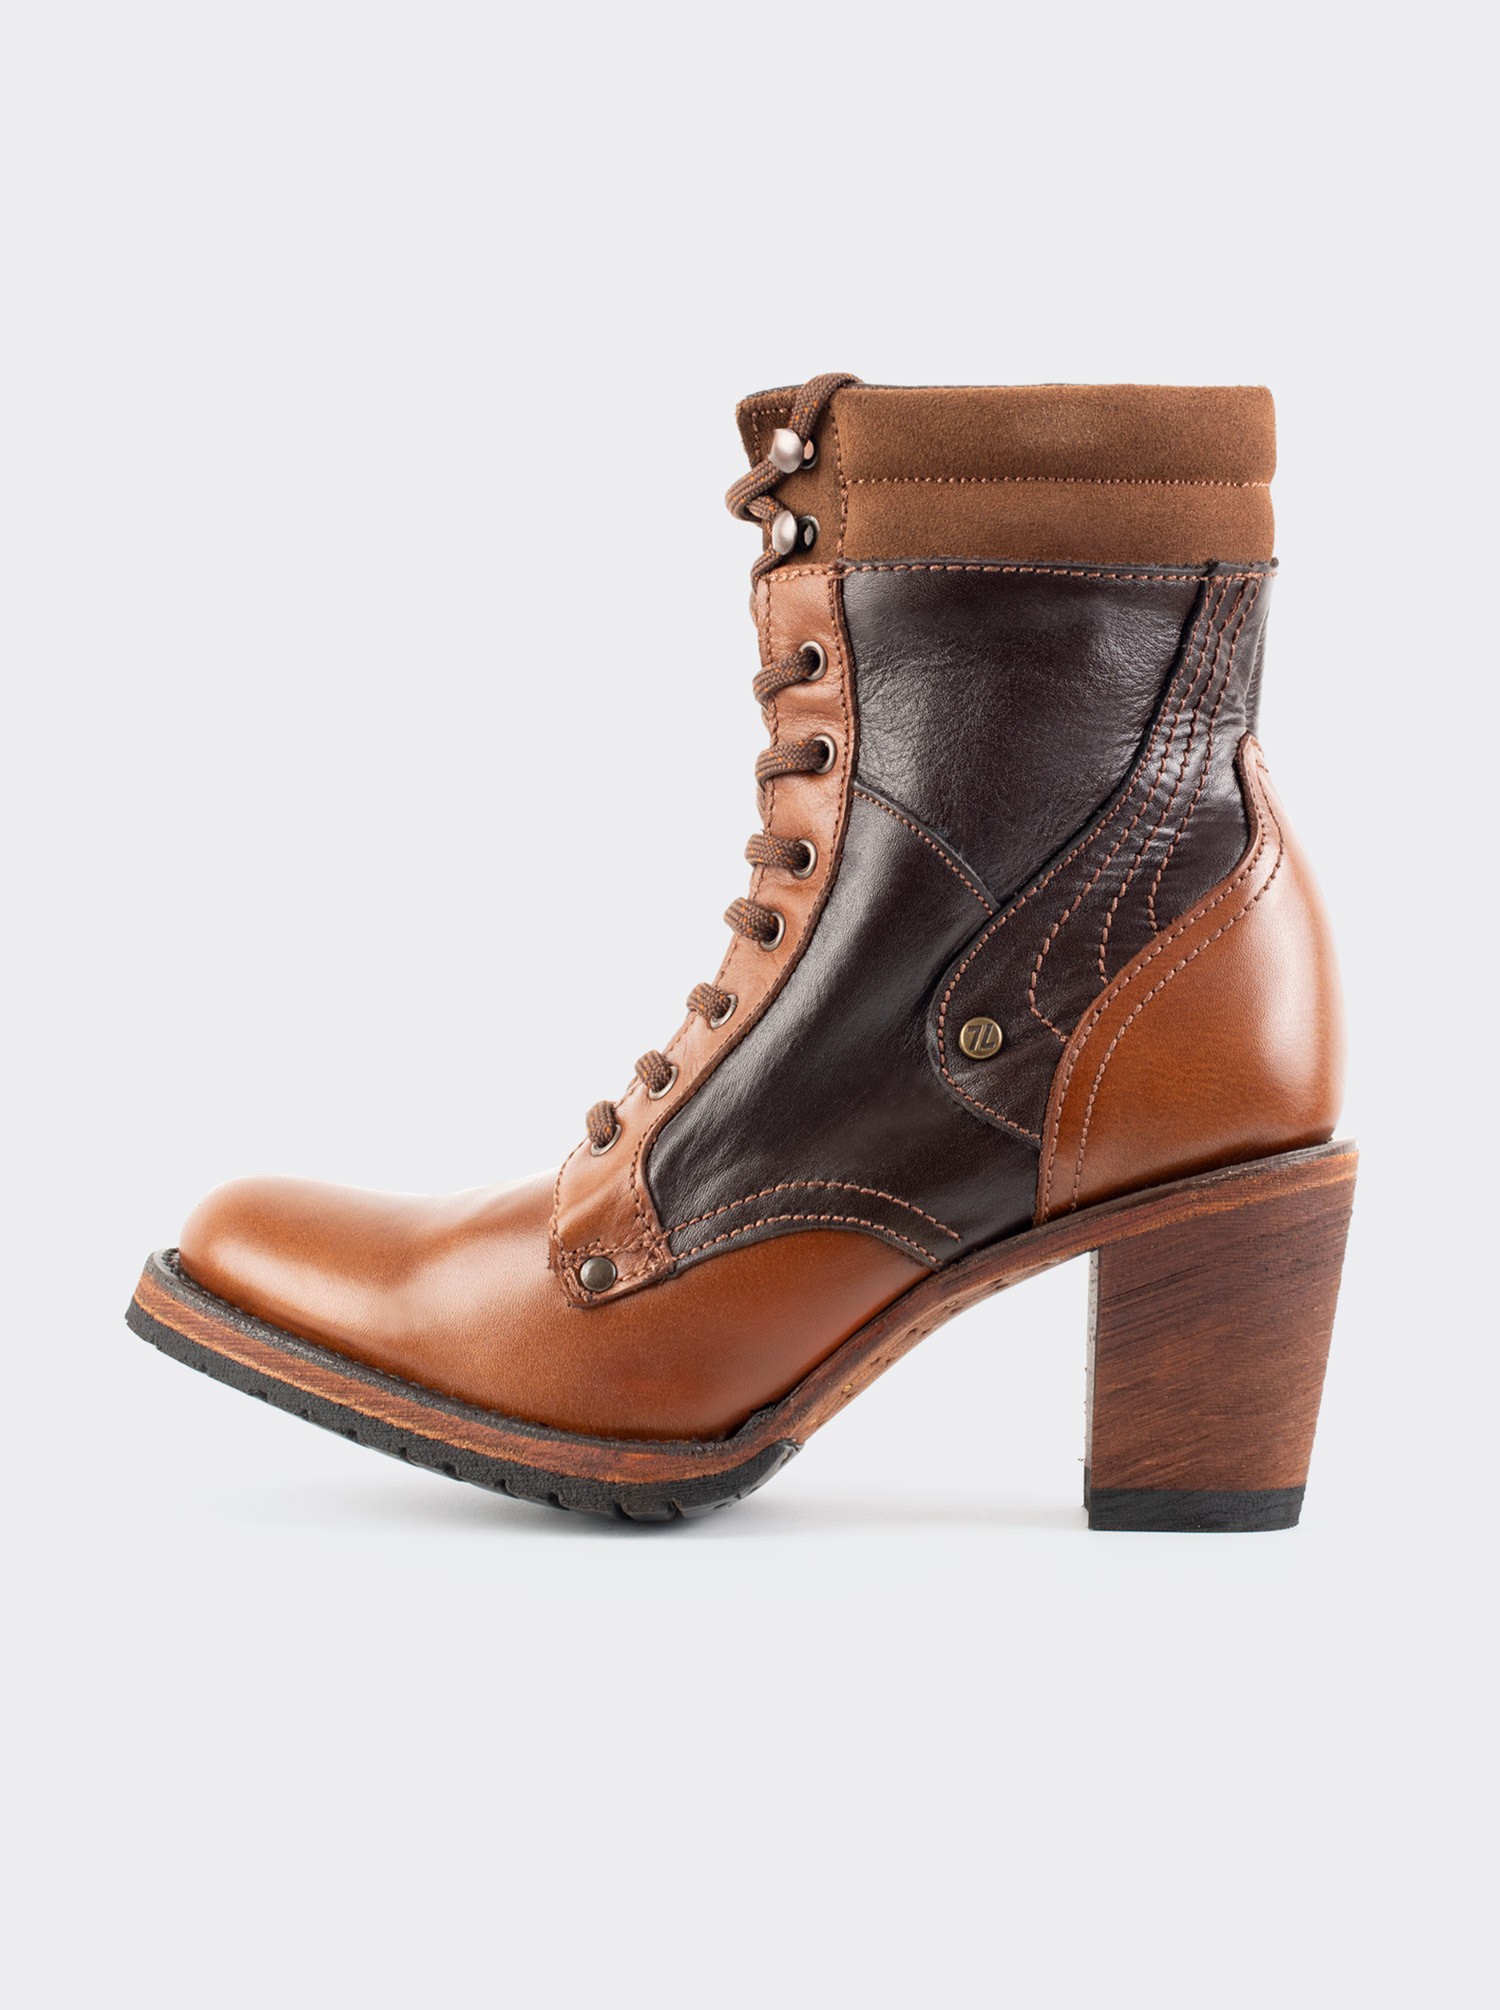 High Heeled Lace-up Women's Bootie in Belmont Whiskey Style 35